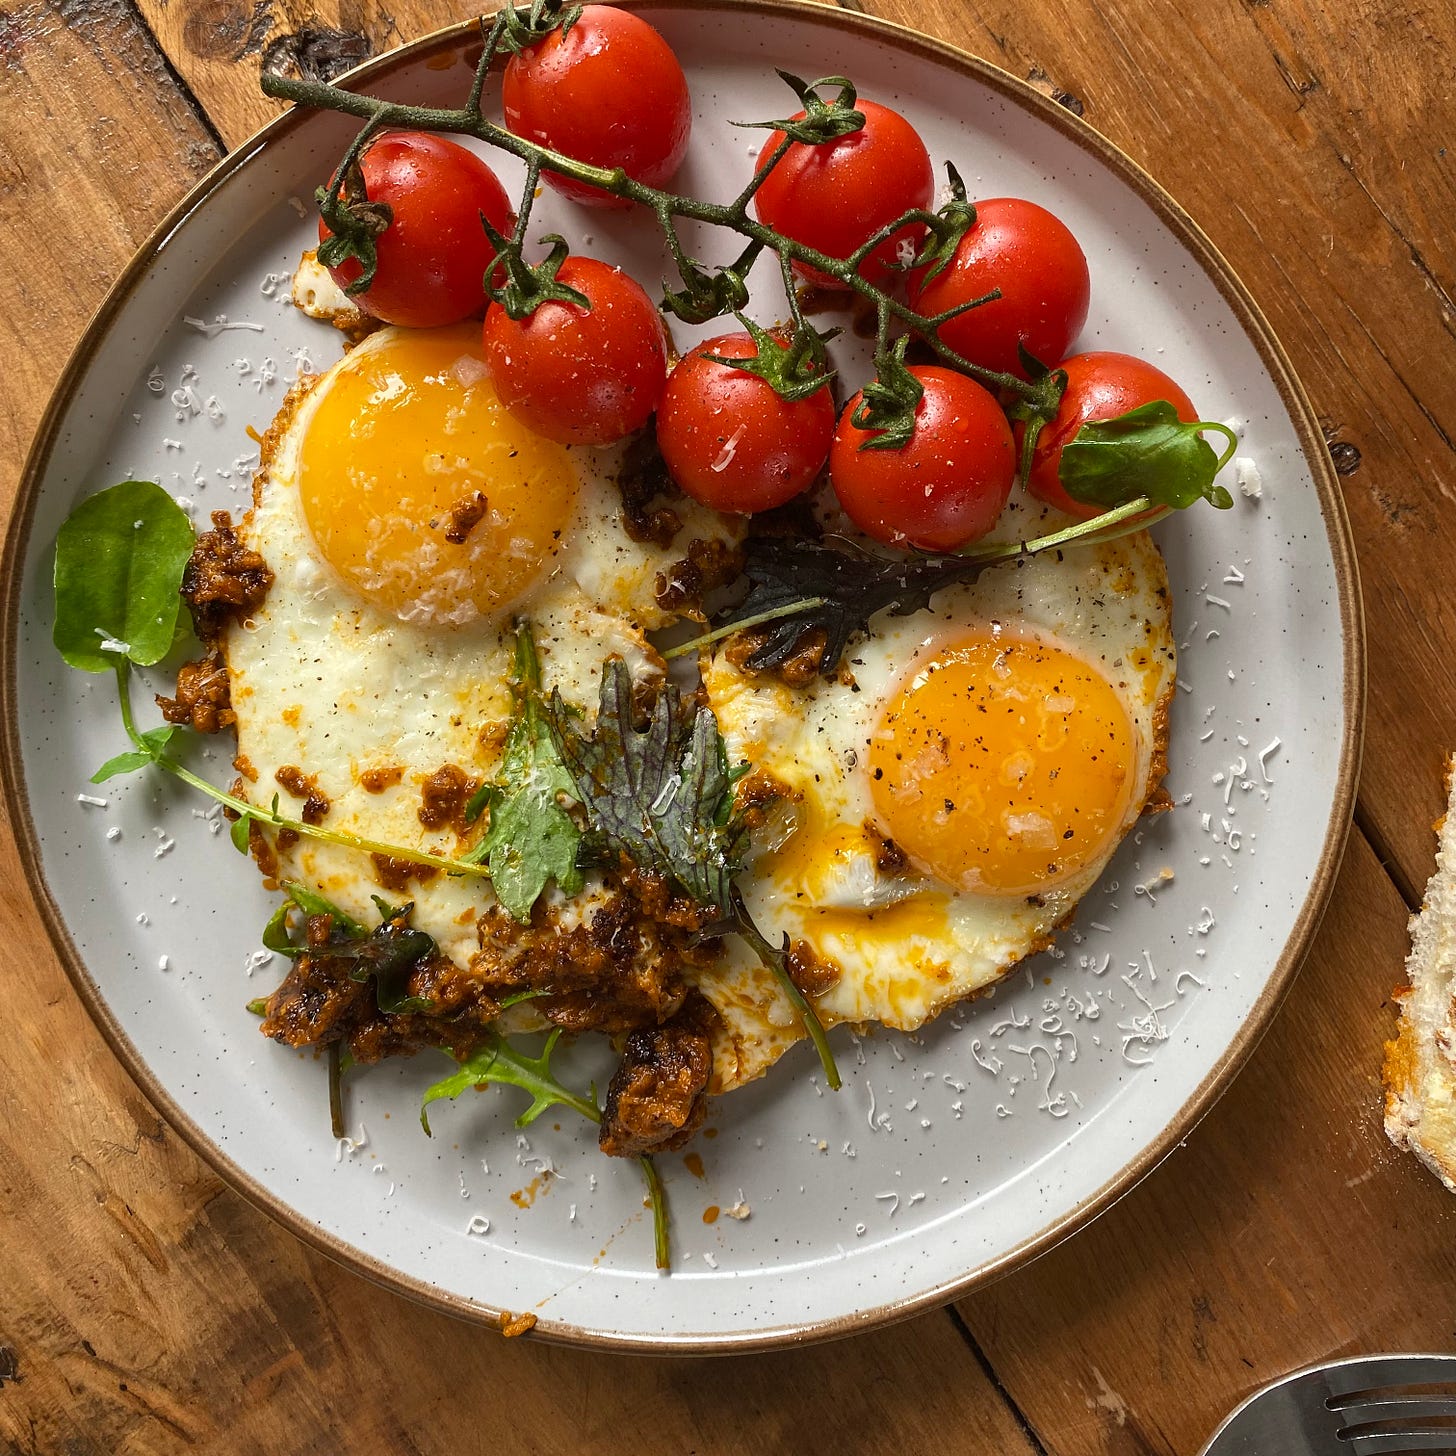 Fried eggs on a plate with vine tomatoes